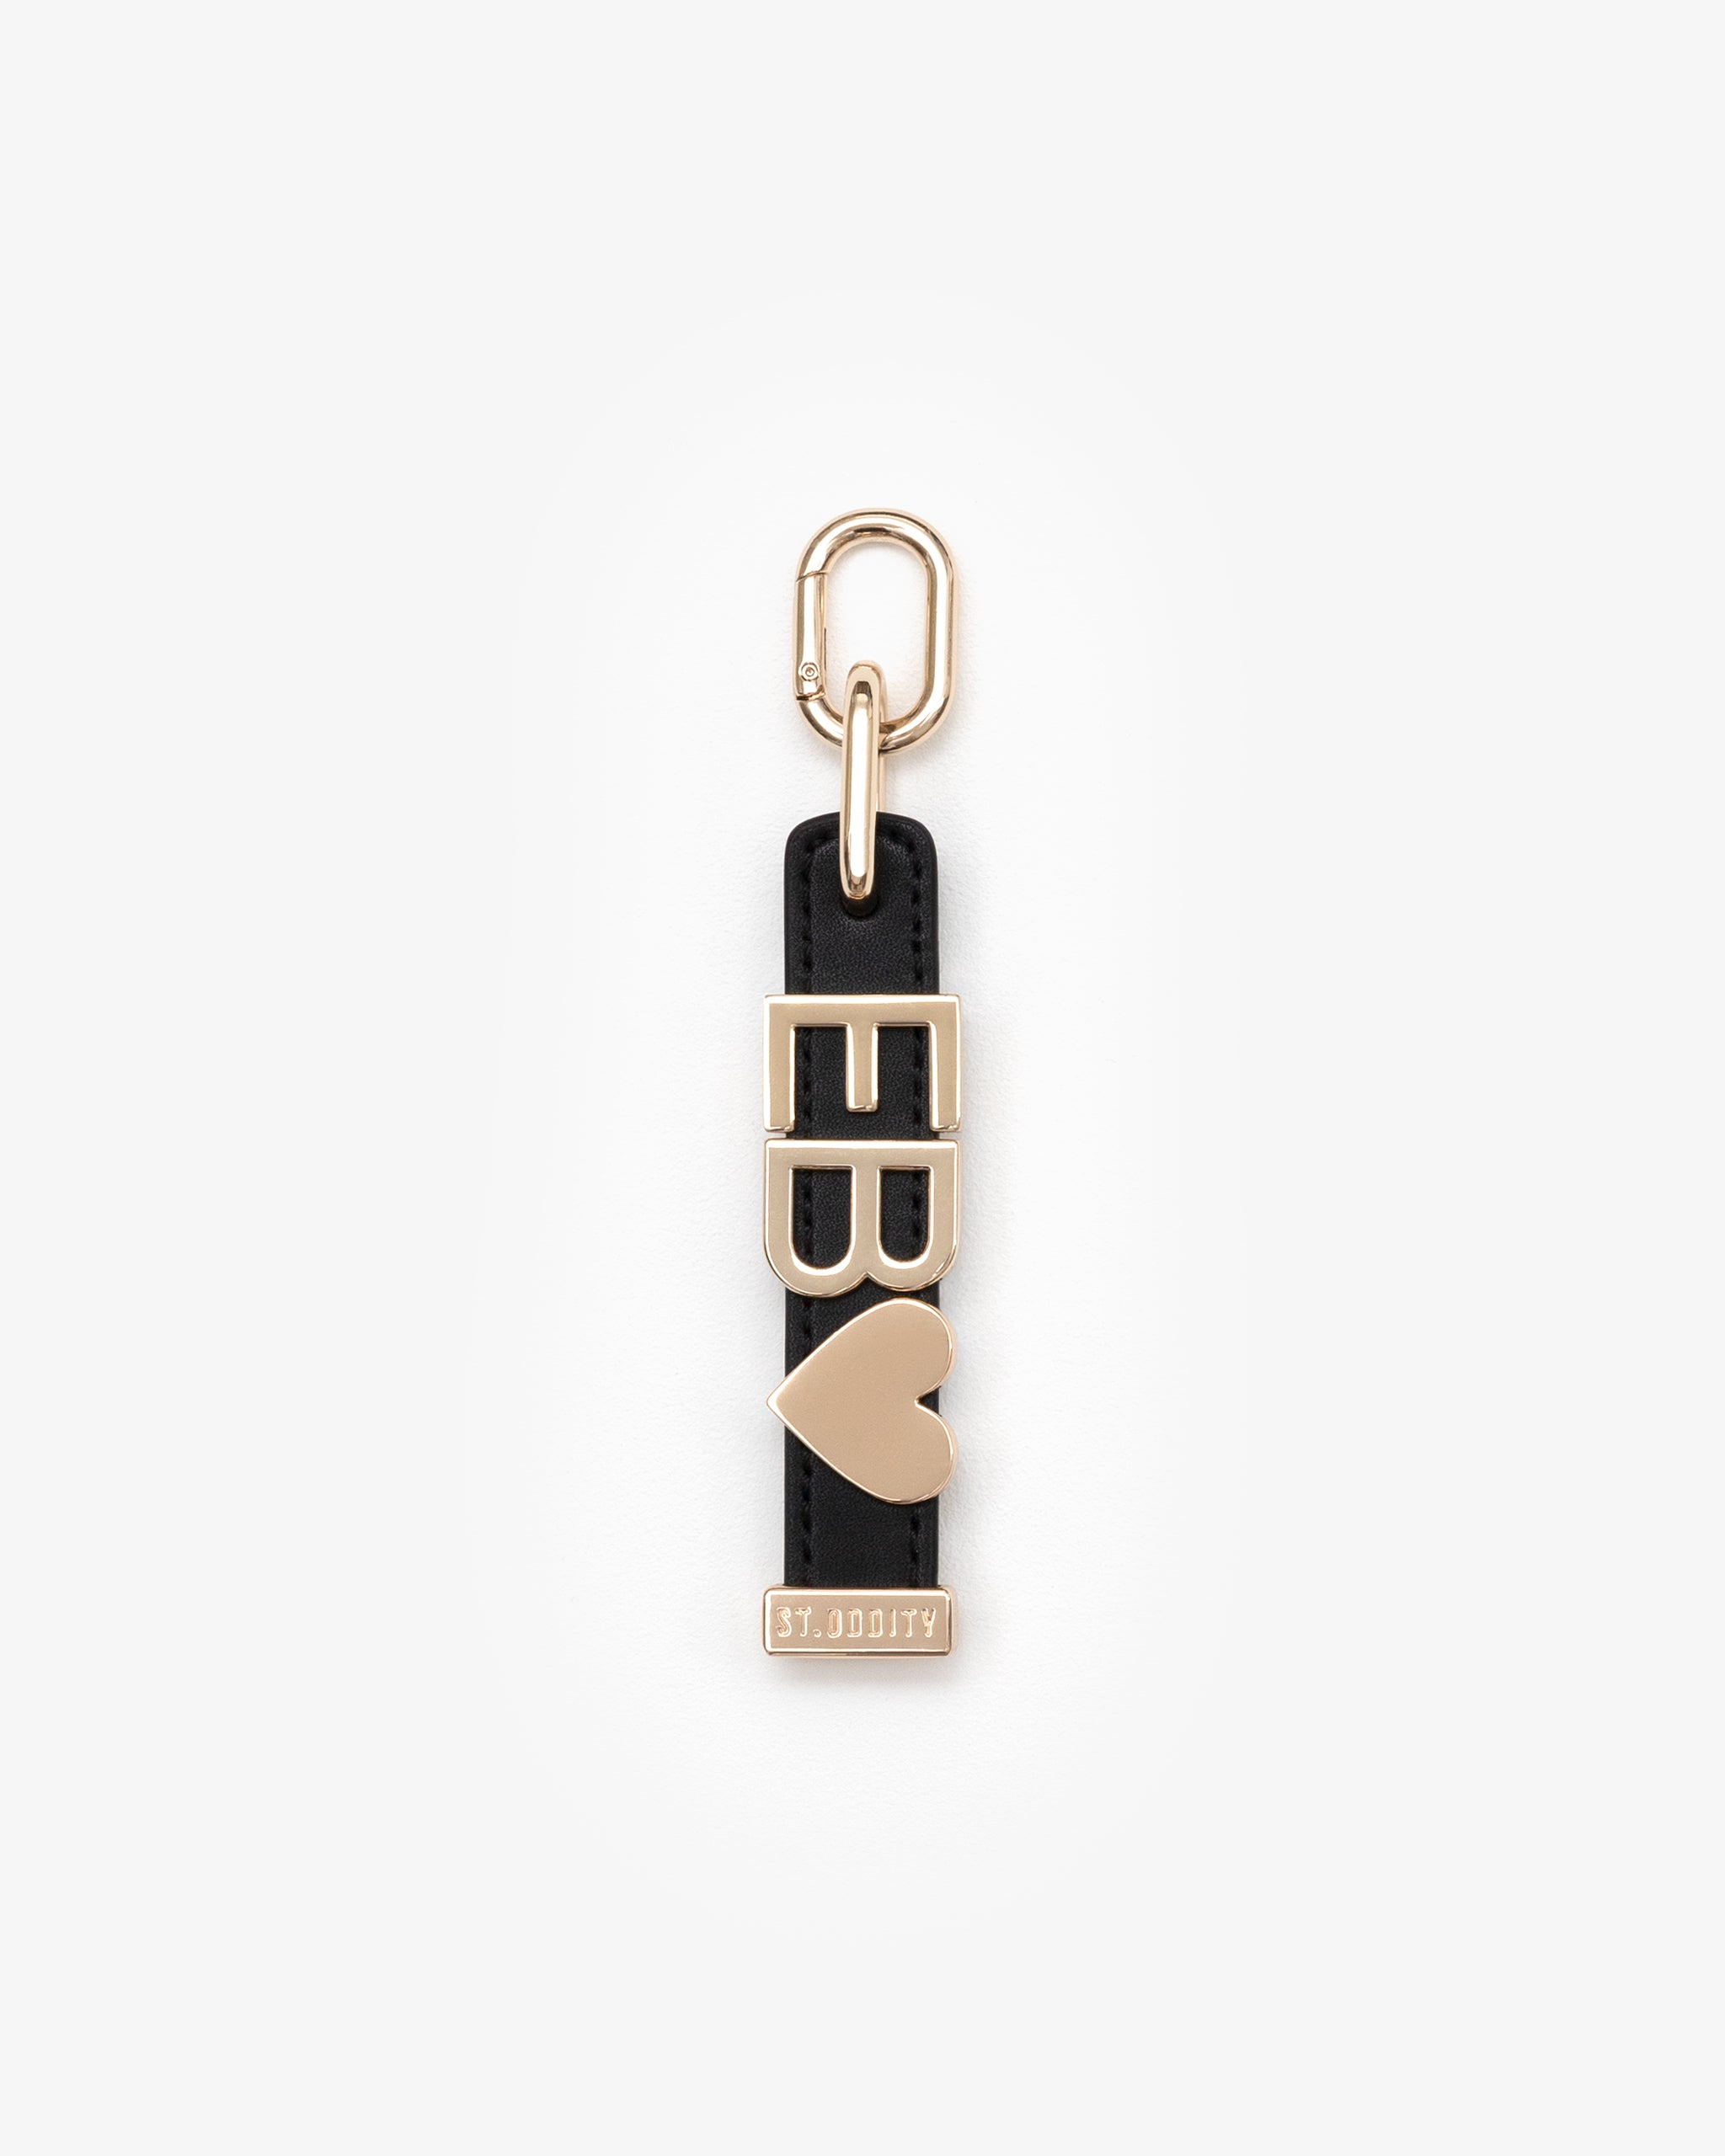 Pre-order (Mid-May): Charm in Black/Gold with Personalised Hardware